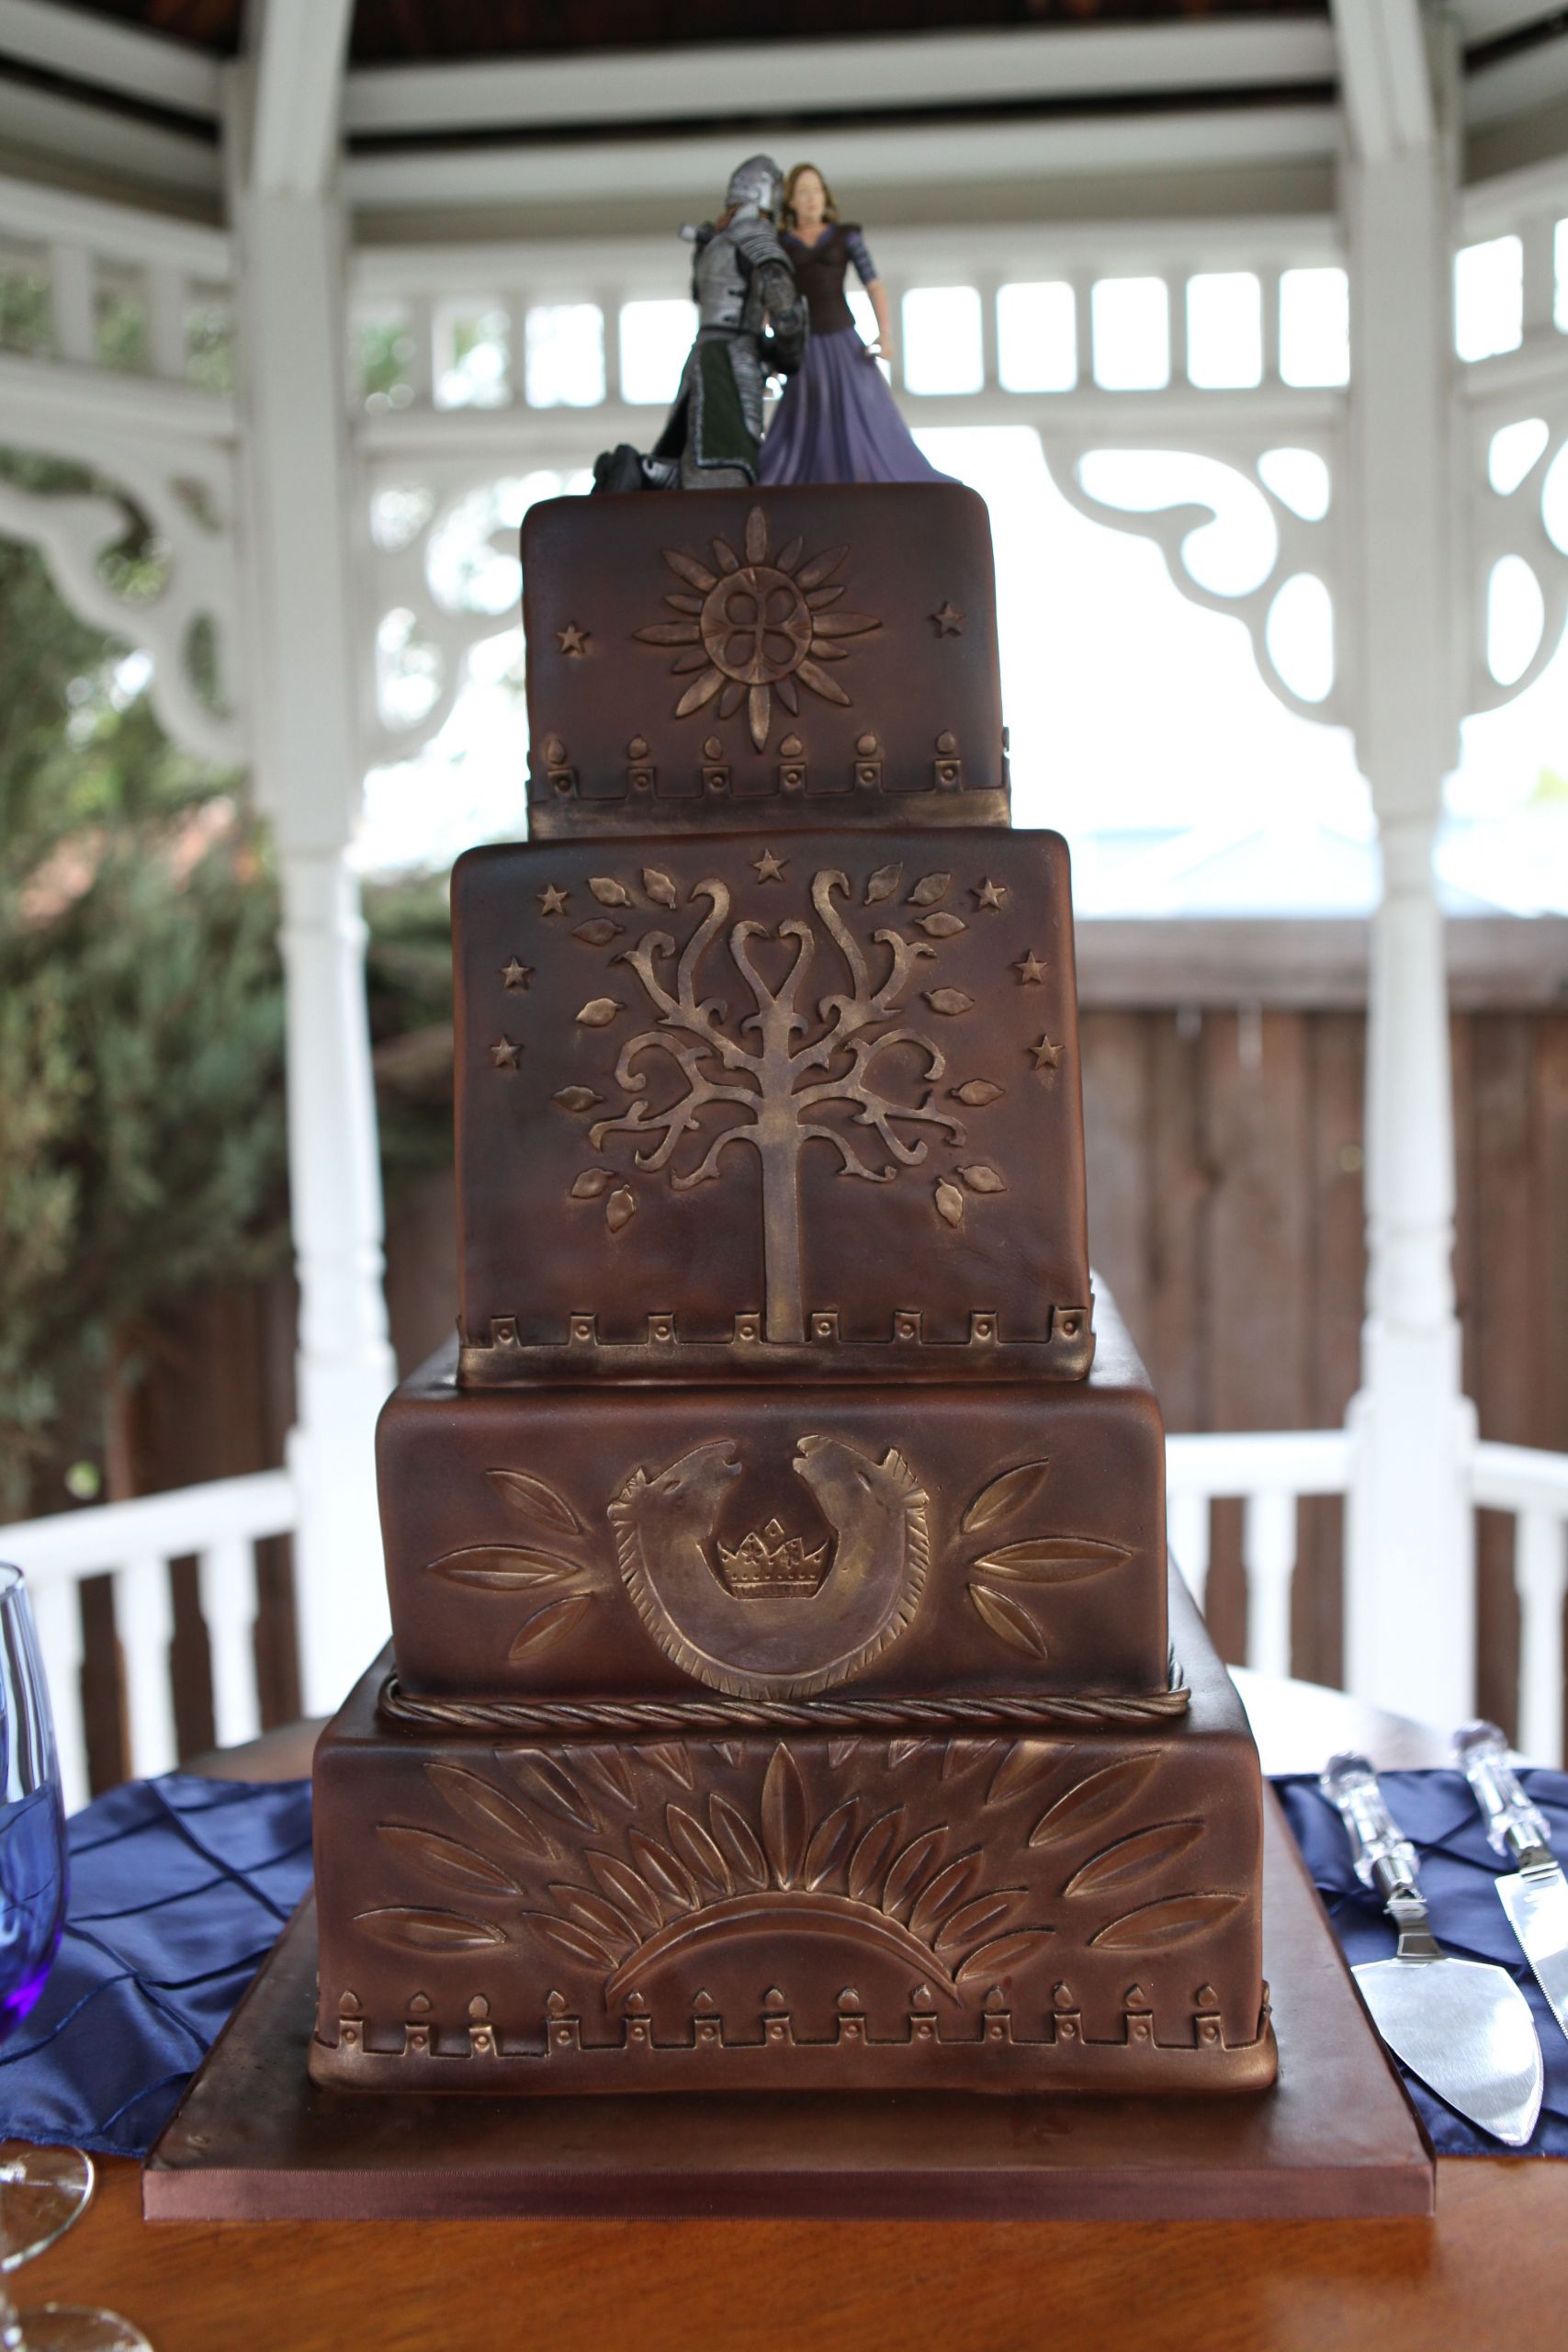 Lord Of The Rings Wedding Cake
 Lord of the Rings wedding cake Eowyn and Faramir on Rohan